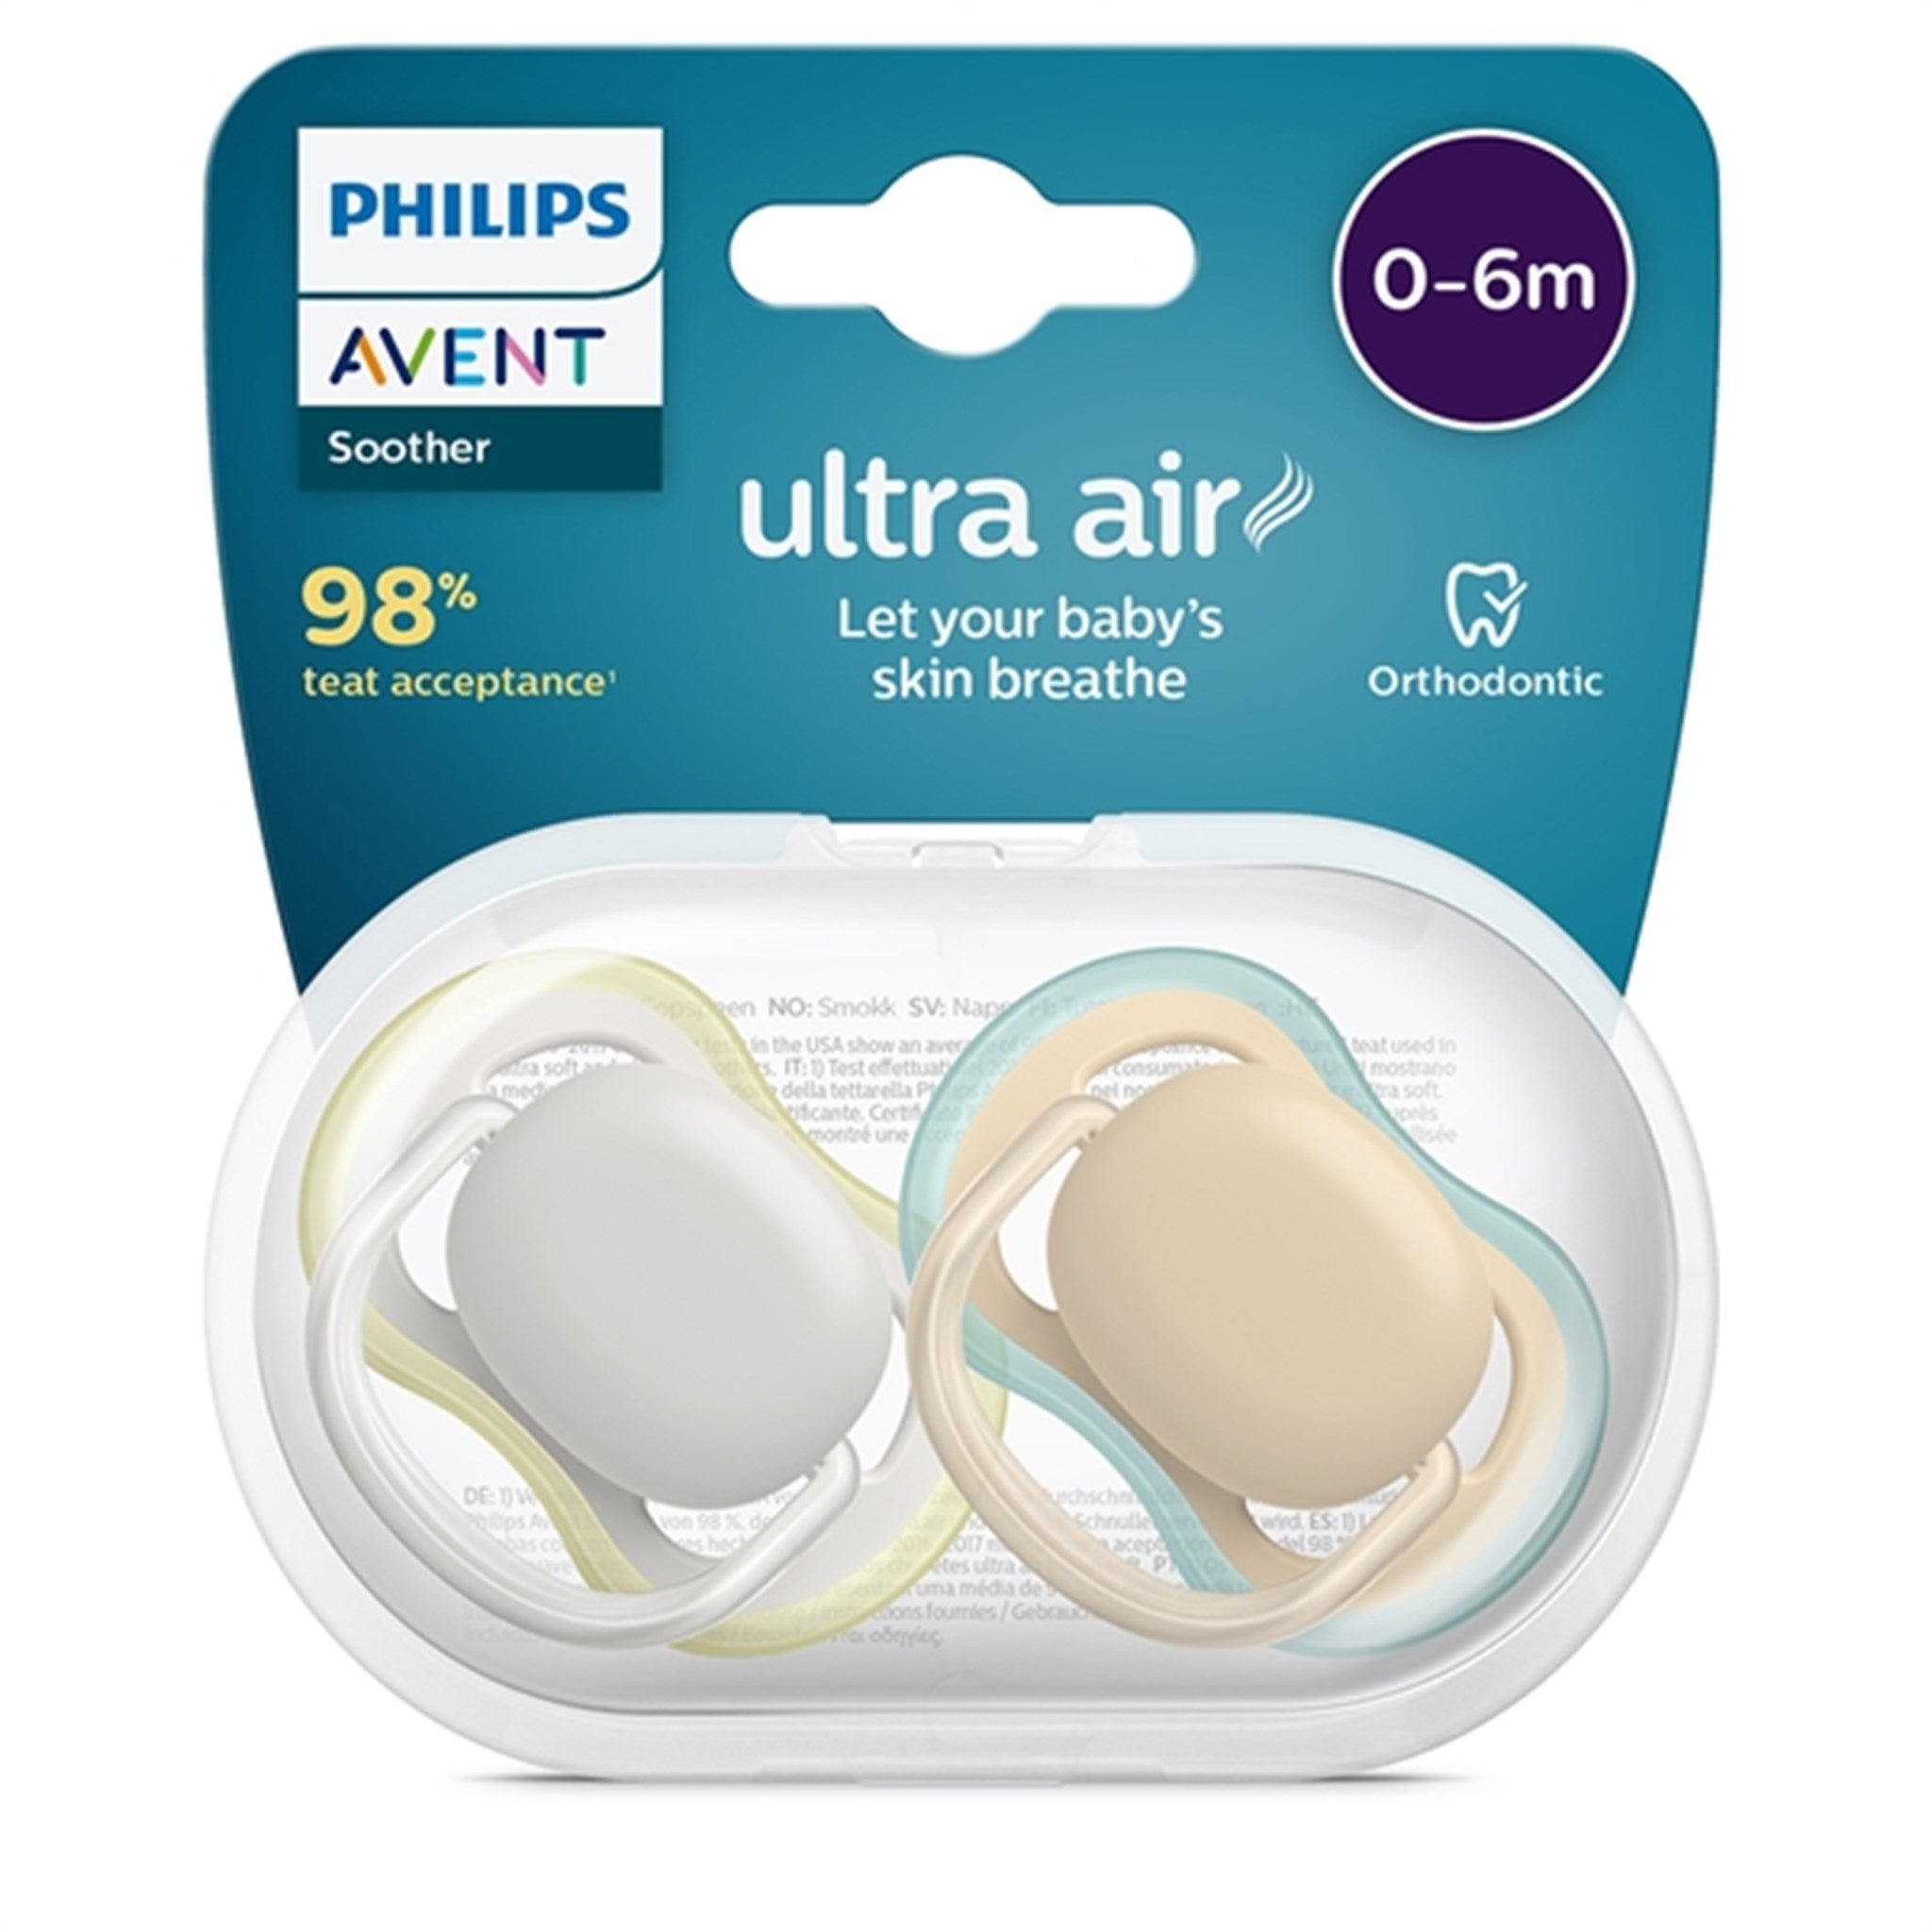 Philips Avent Ultra Air Napp 0-6 mdr 2-pak 2